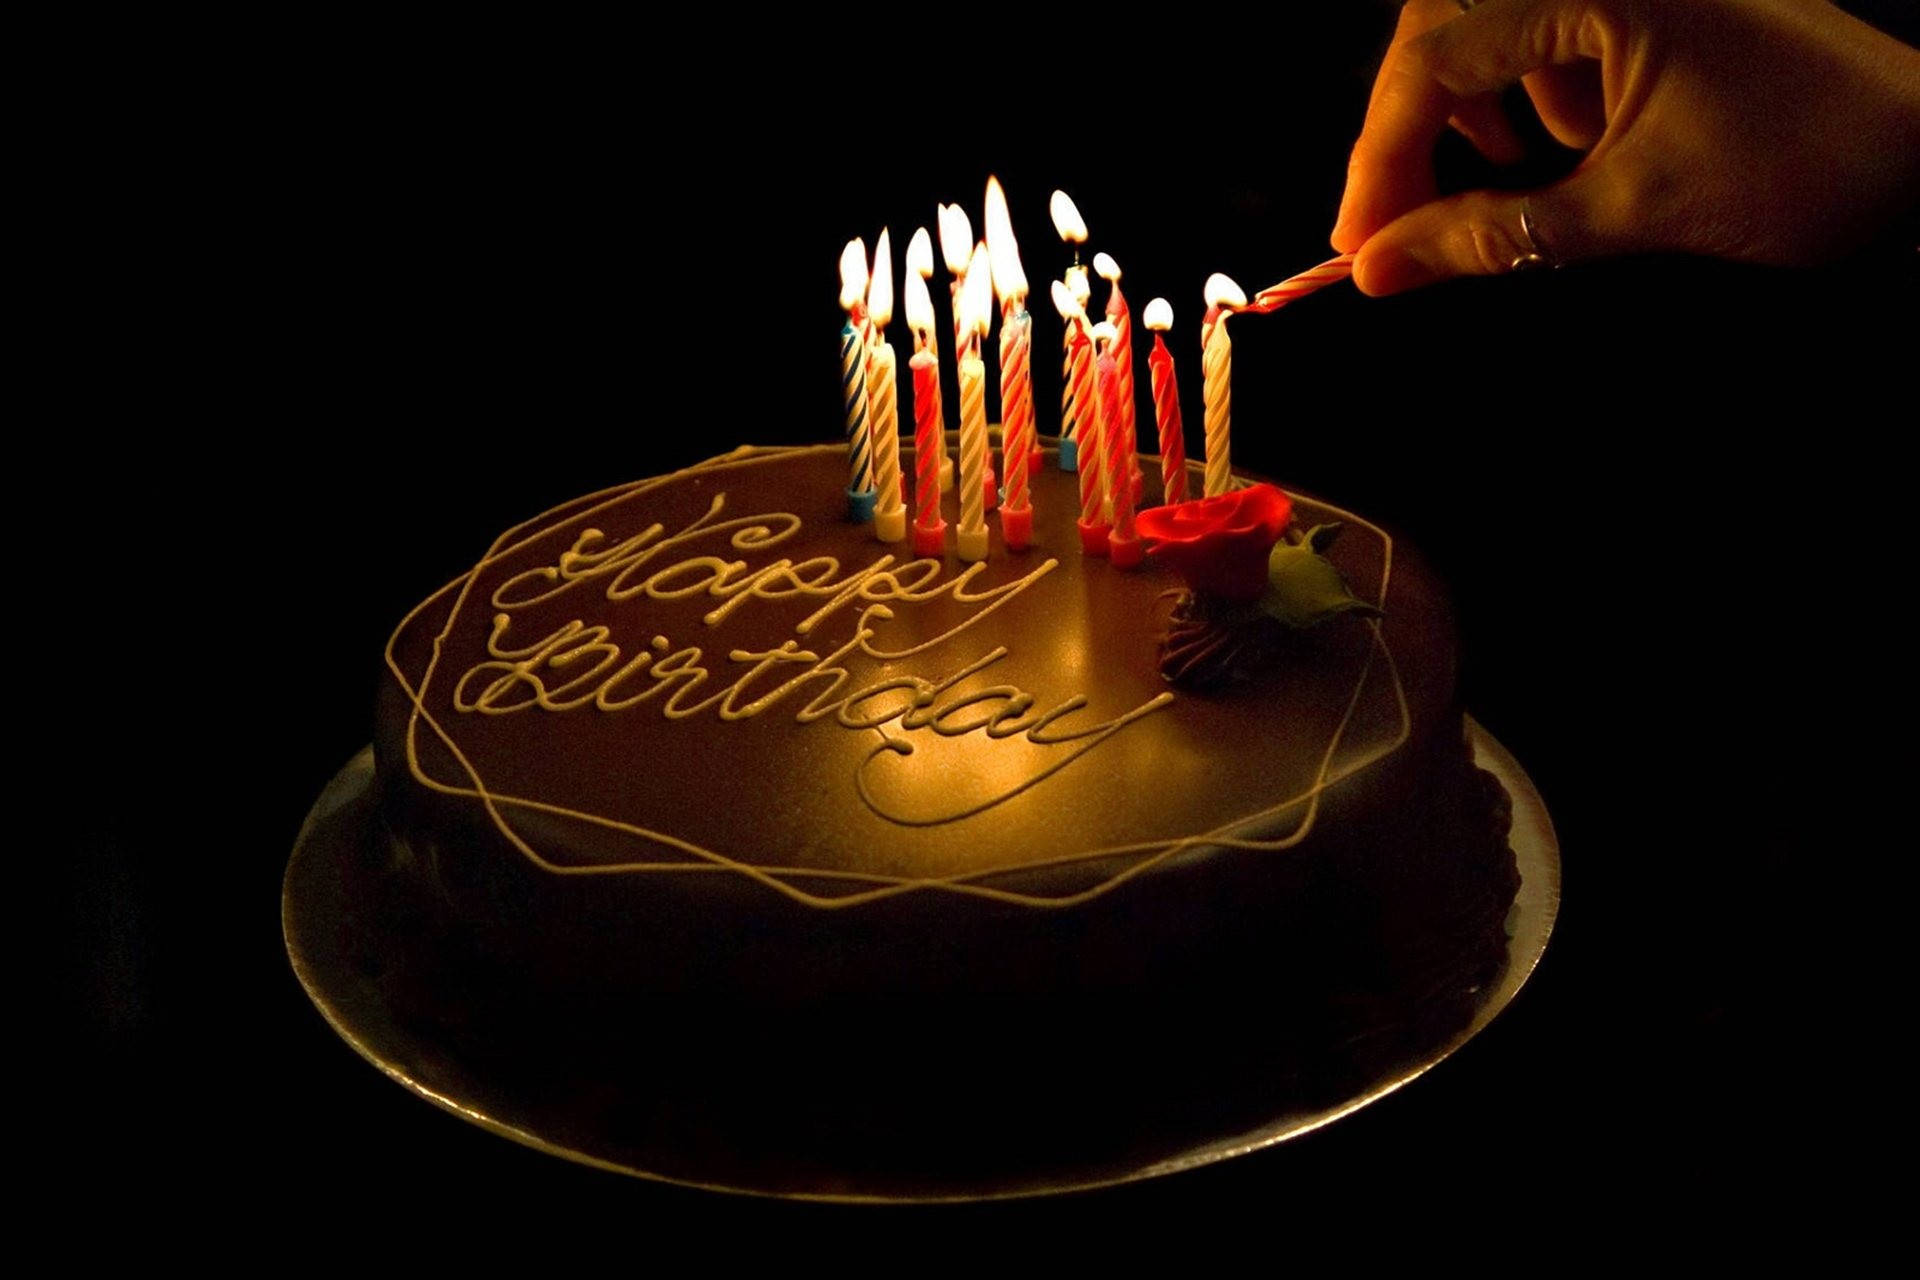 Dark Chocolate Birthday Cake Adorned with Lit Candles Wallpaper